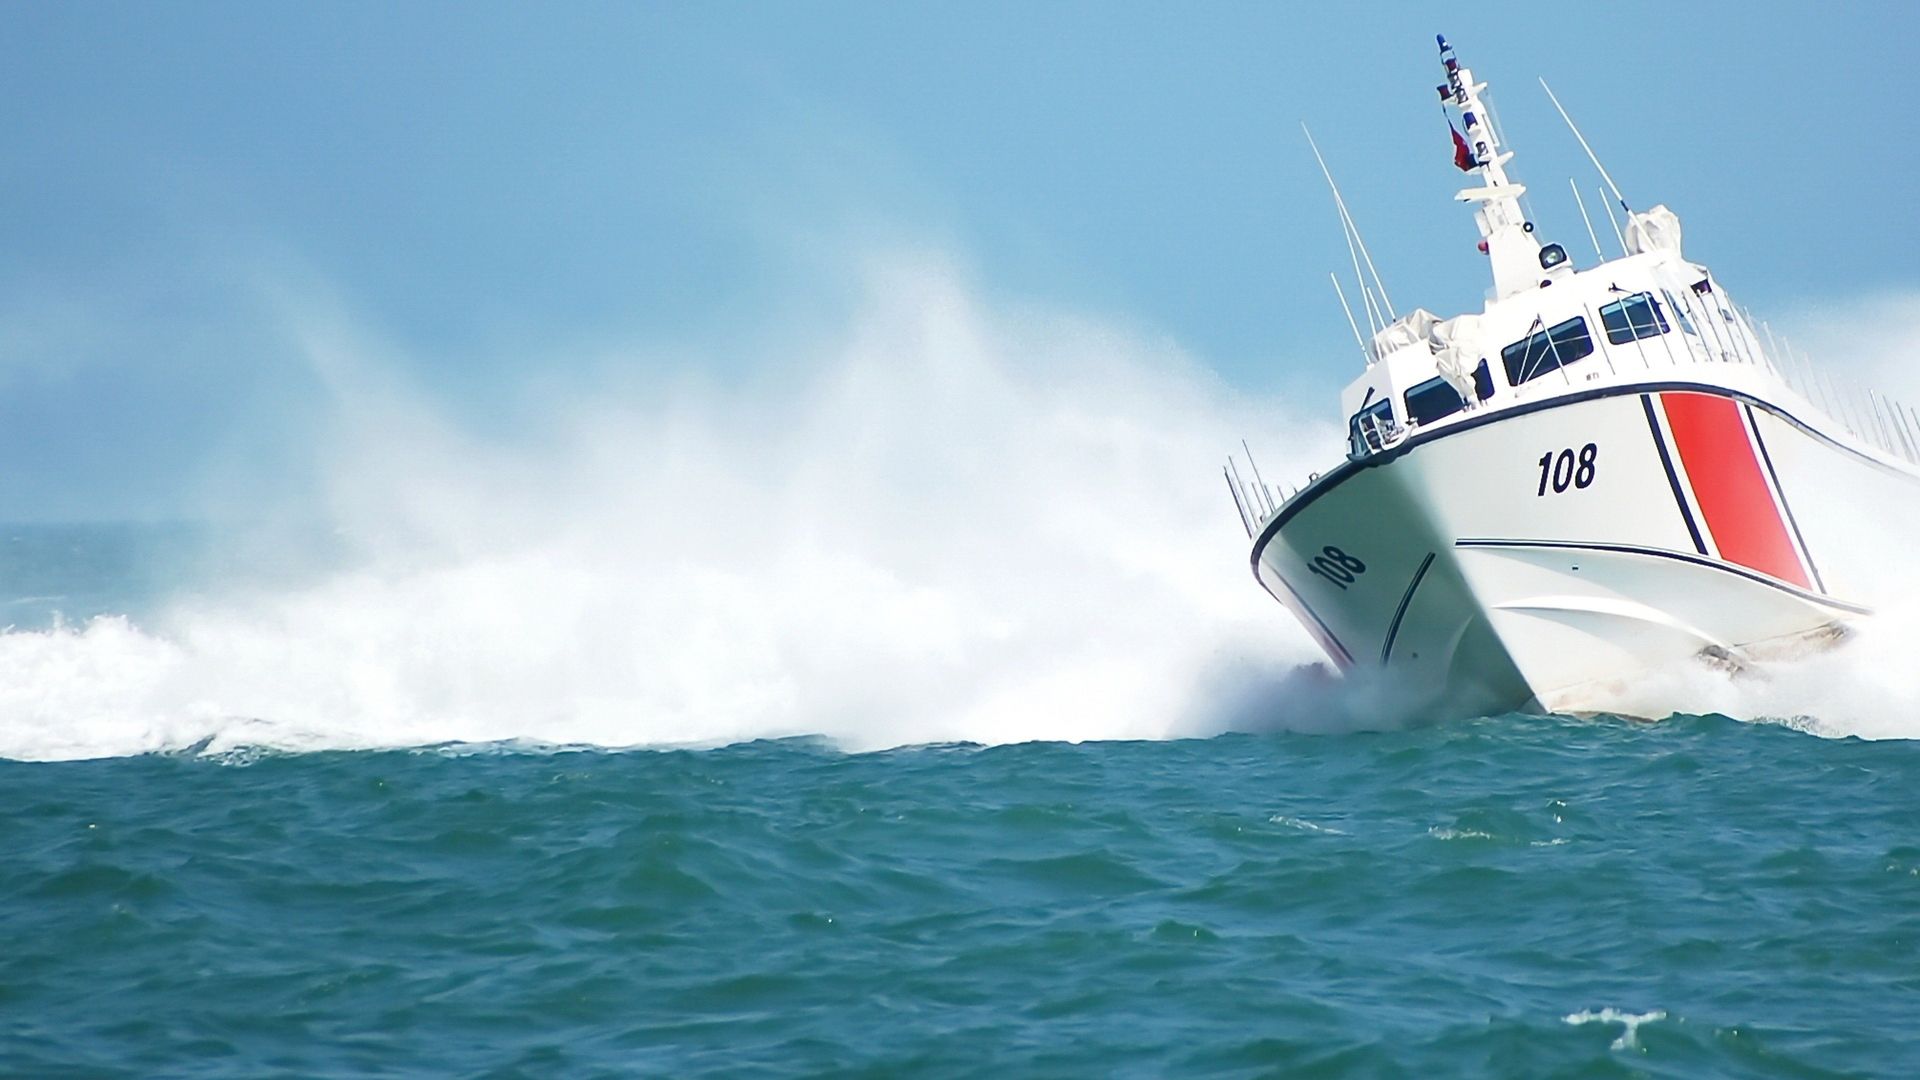 Coast Guard: Cape Disappointment - Pacific Northwest Backdrop